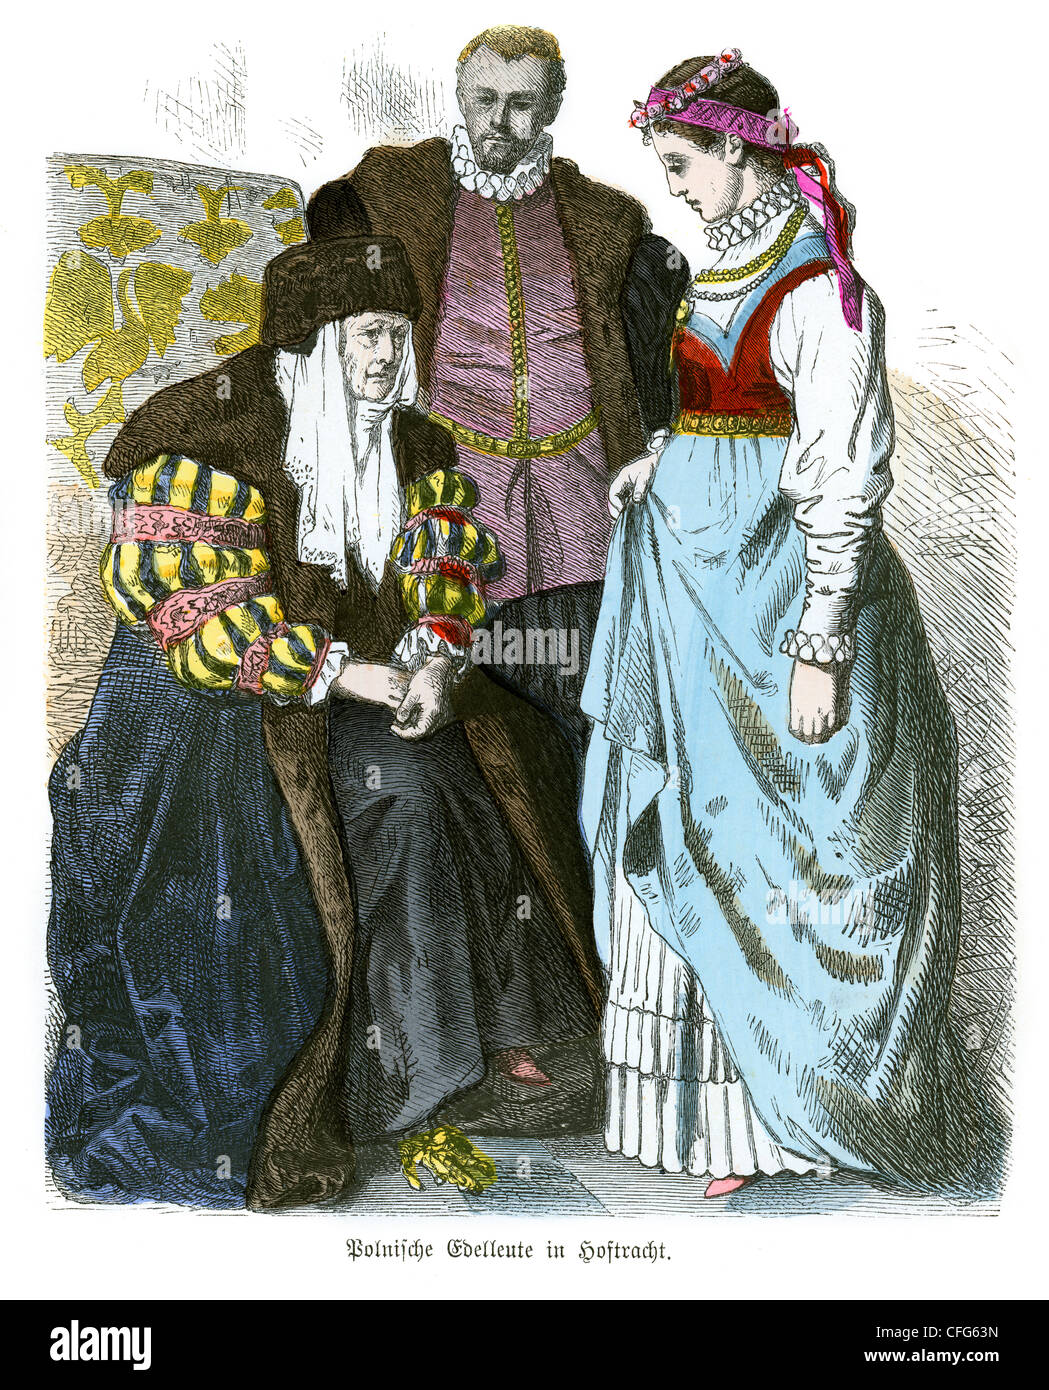 Polish noble people in court dress from the 16th century Stock Photo